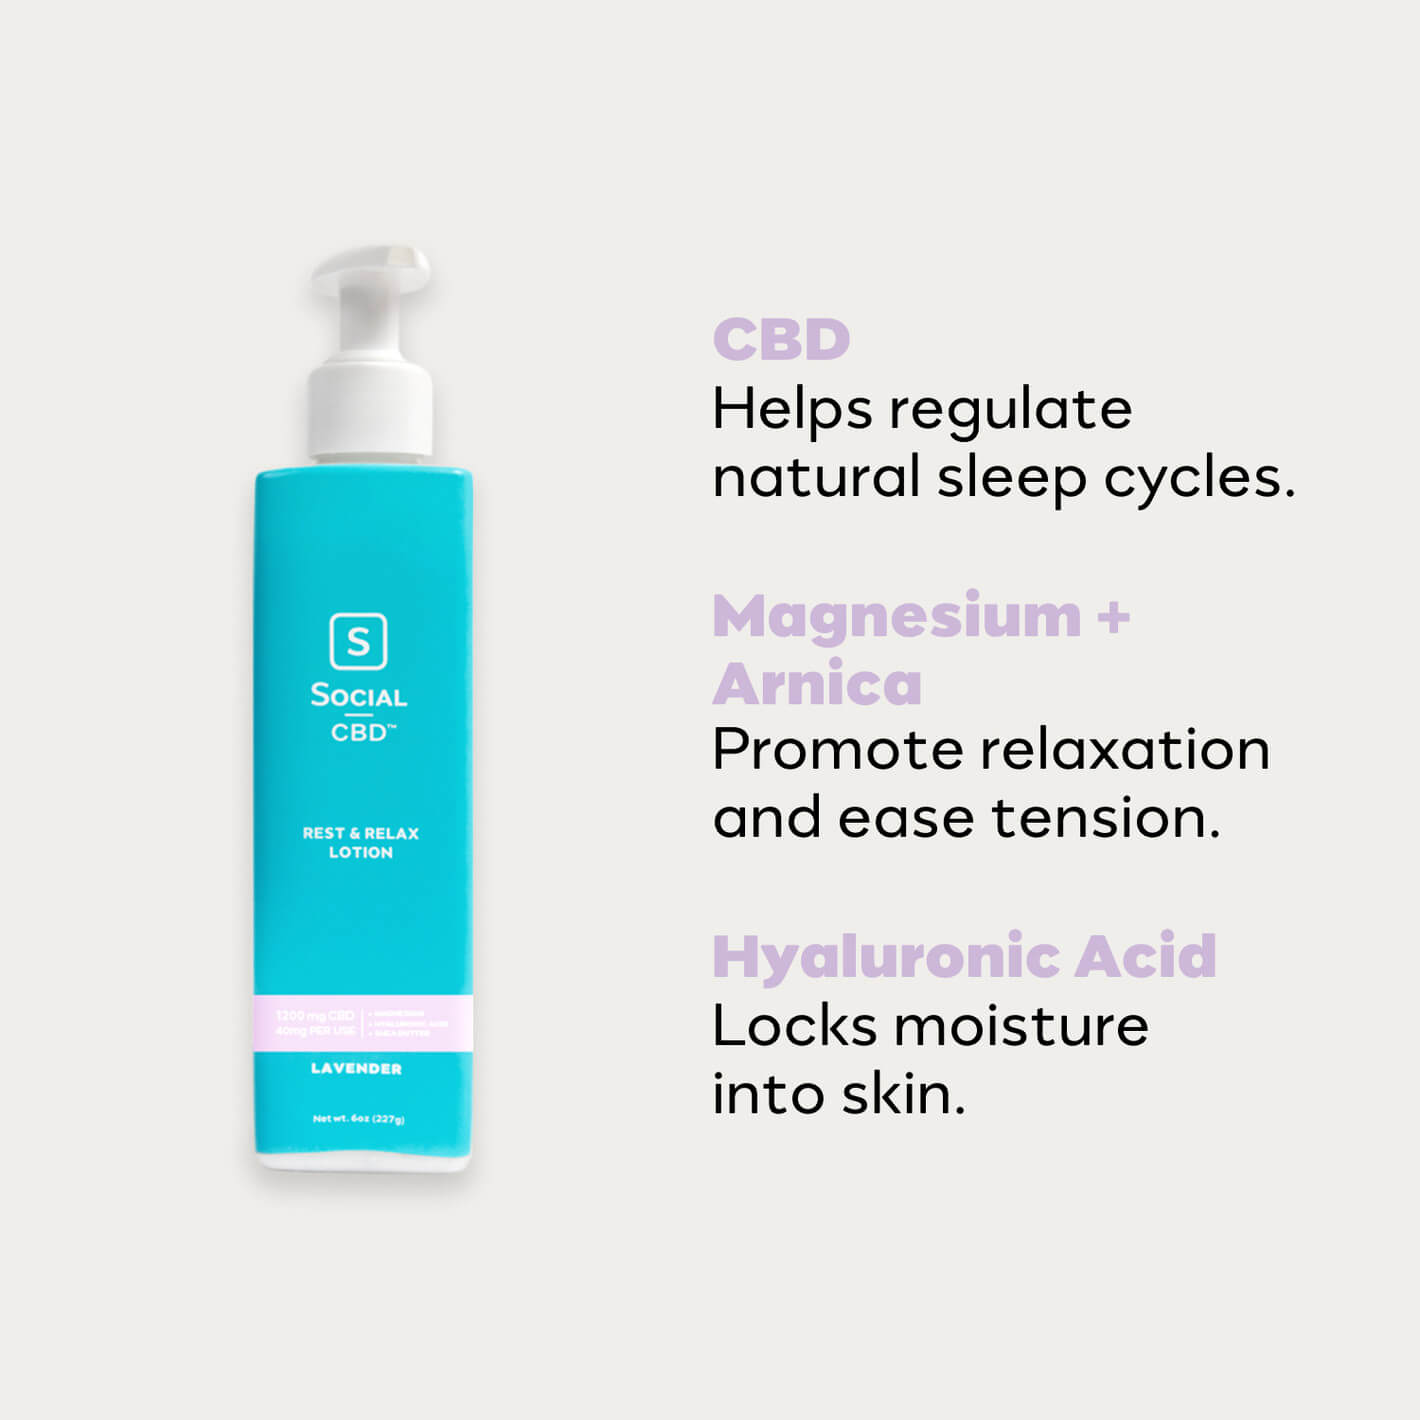 Social CBD Rest and Relax CBD Body Lotion 1200 mg image_2